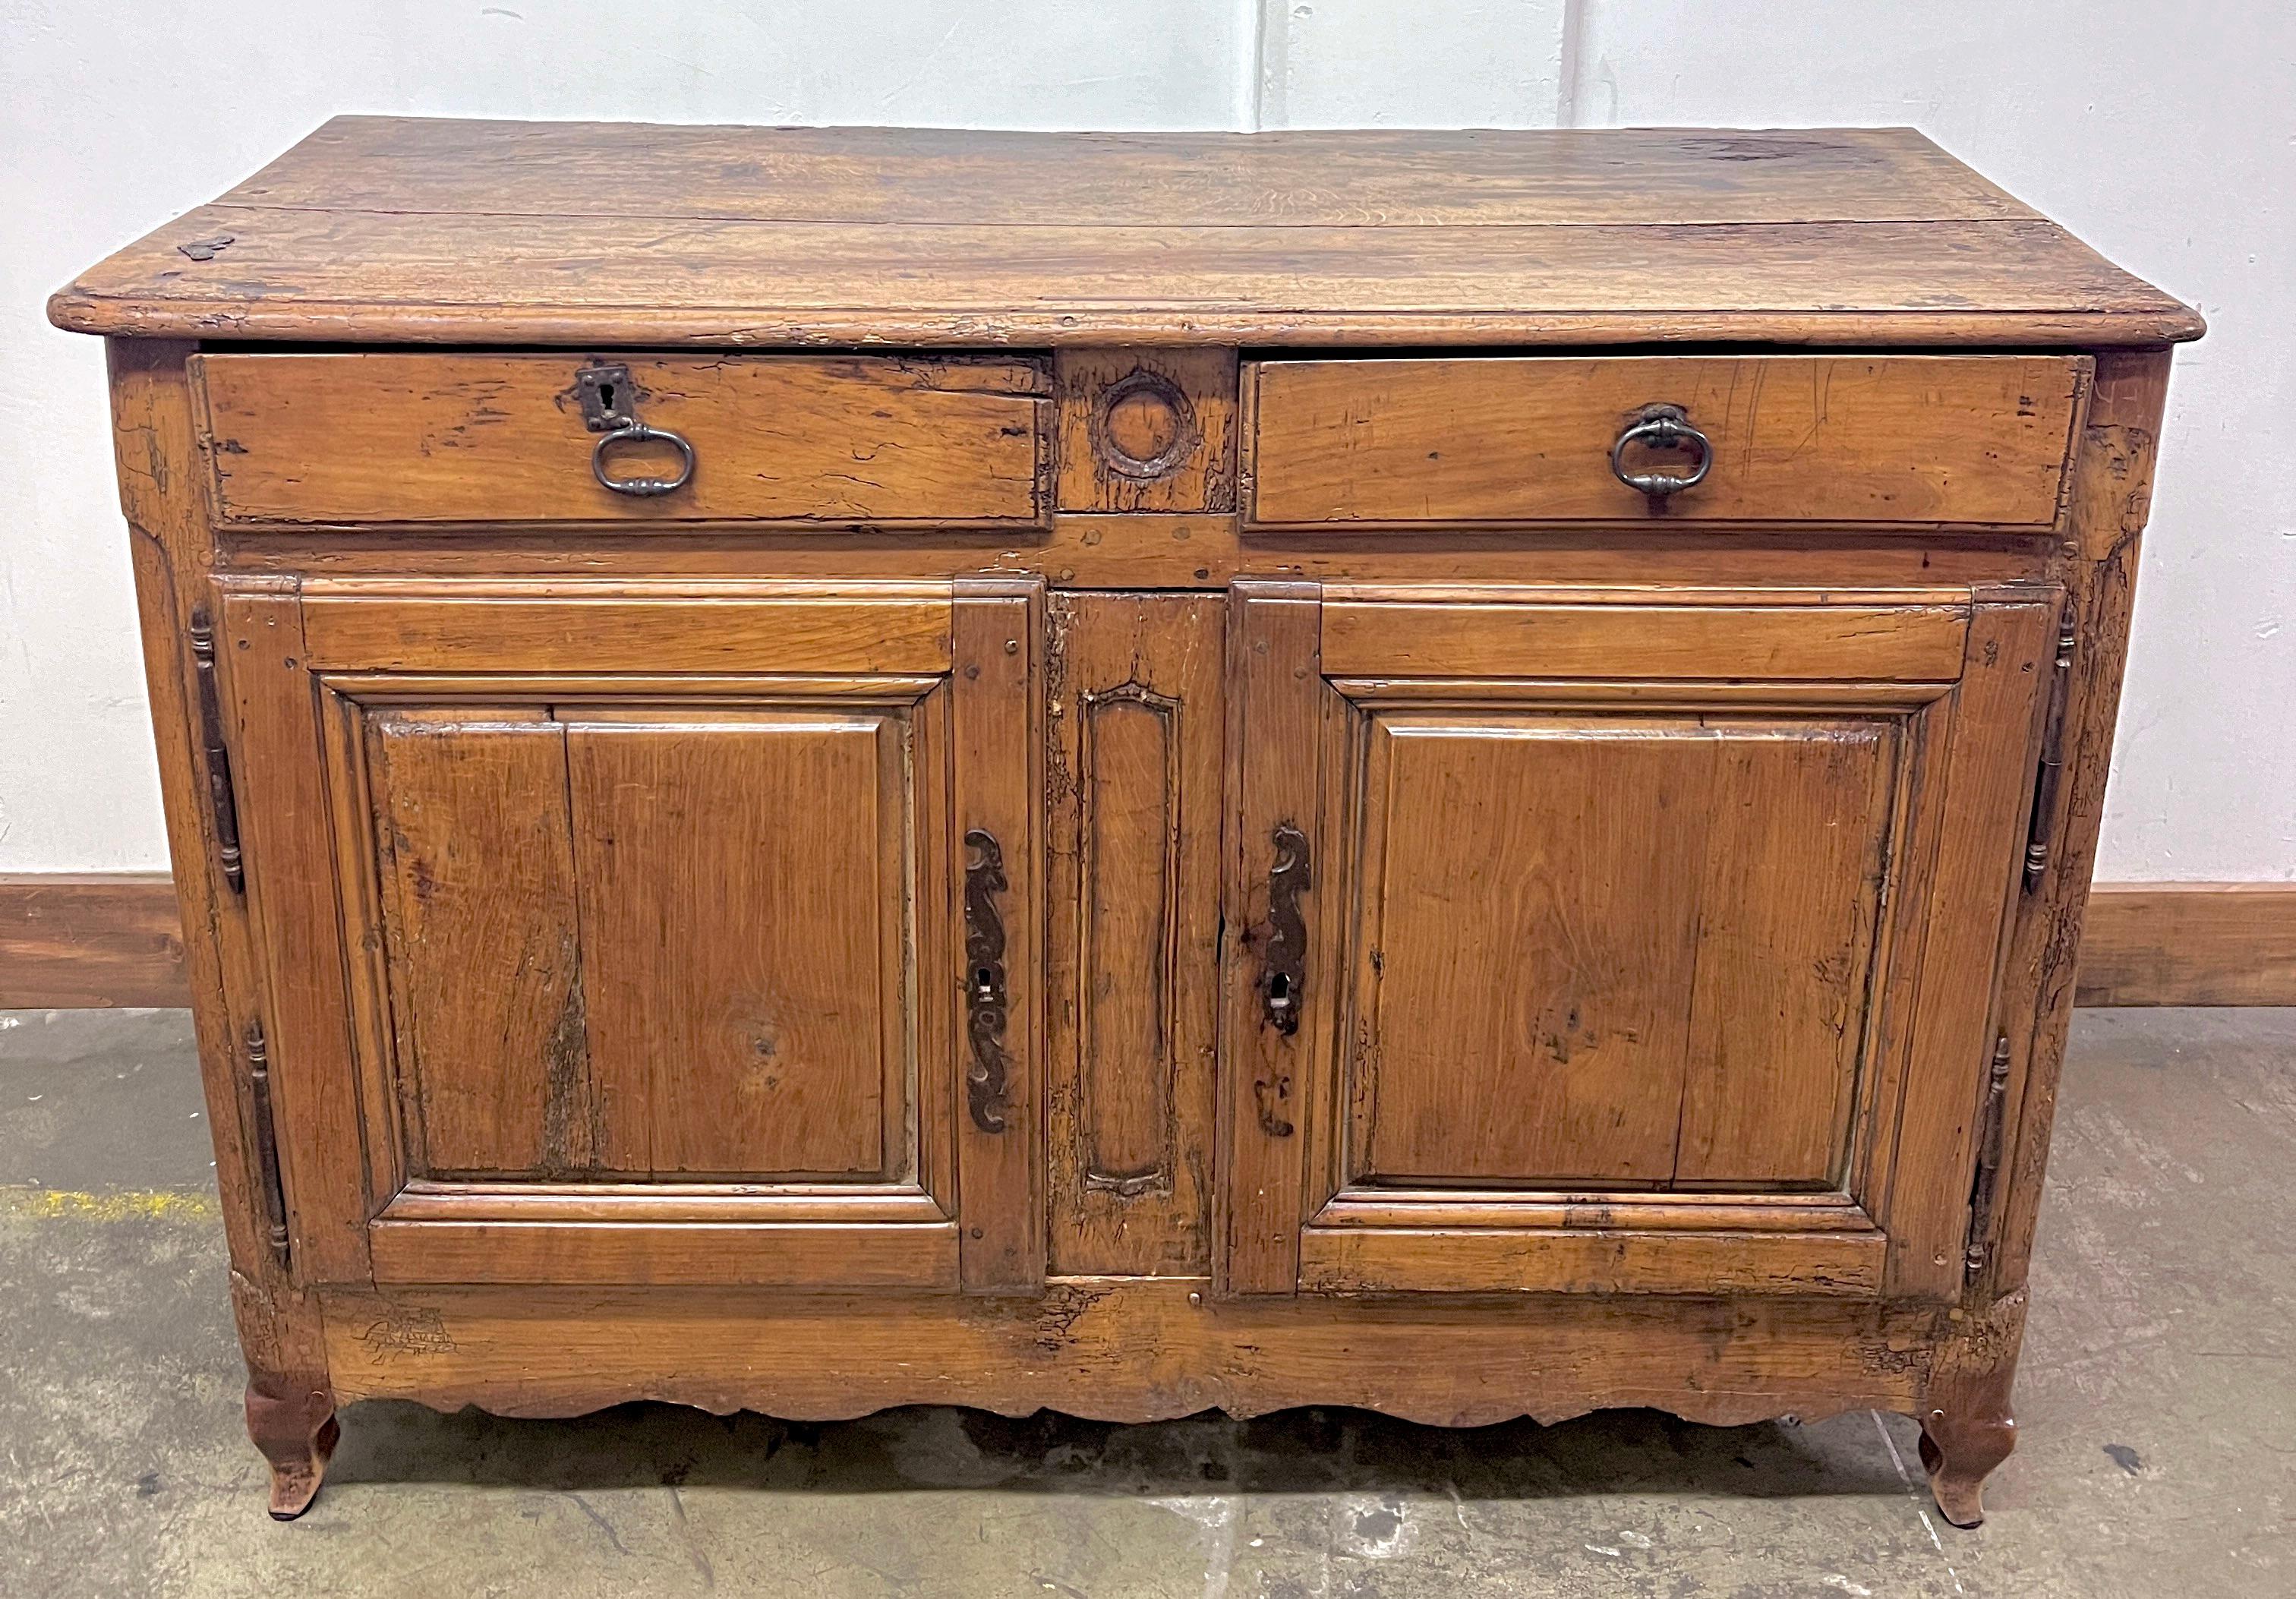 French Country 18th Century Late Regency, Early Louis xv Walnut Buffet.

A beautifully patinated solid walnut, two drawers, with storage beneath.  the piece is nearly 300 years old and in sold condition.  The buffet or cabinet would be a compliment